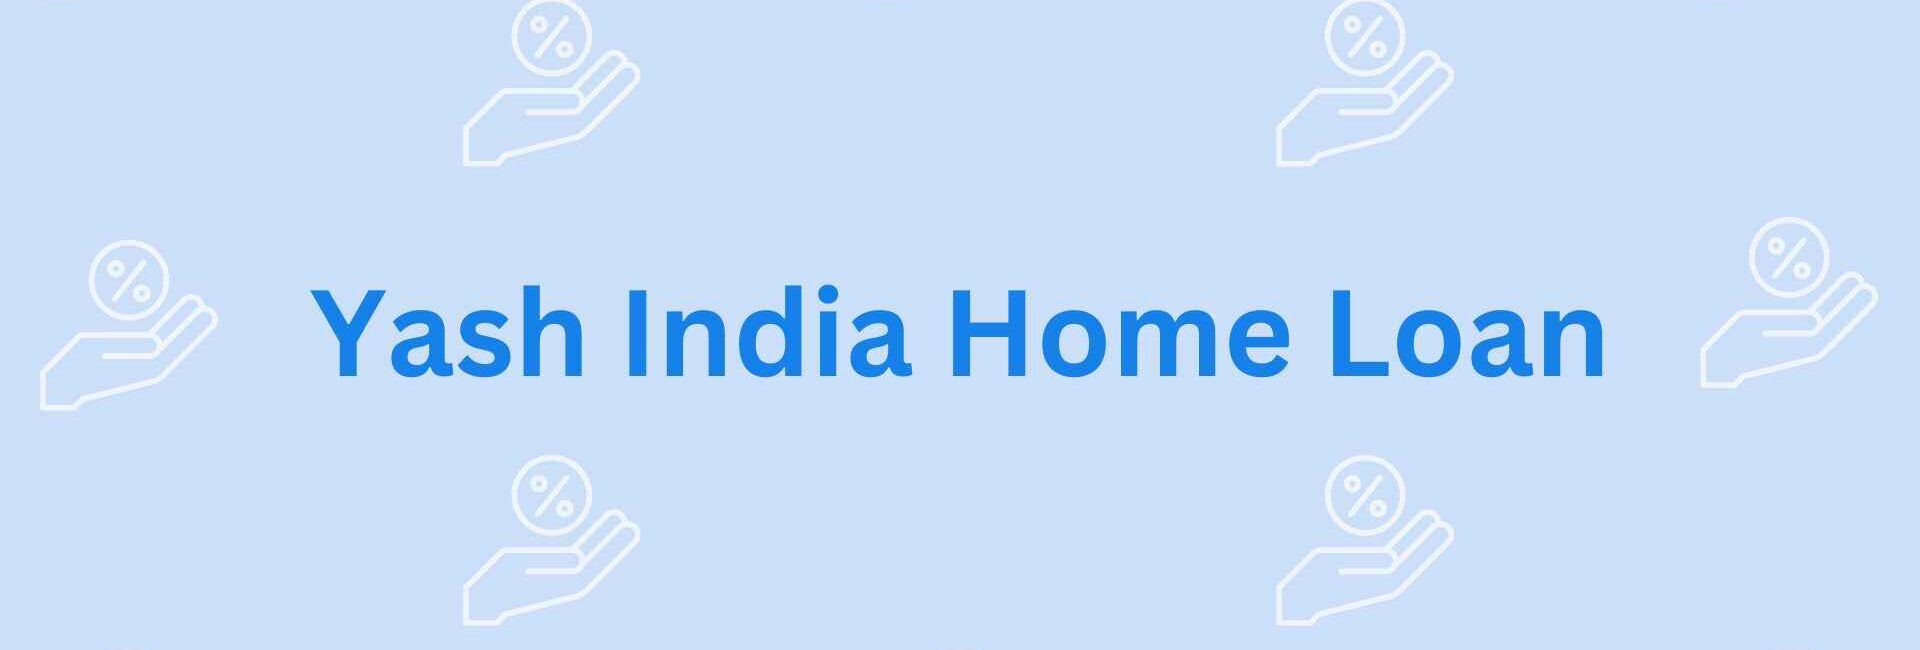 Yash India Home Loan- Loan Assistance services in Noida